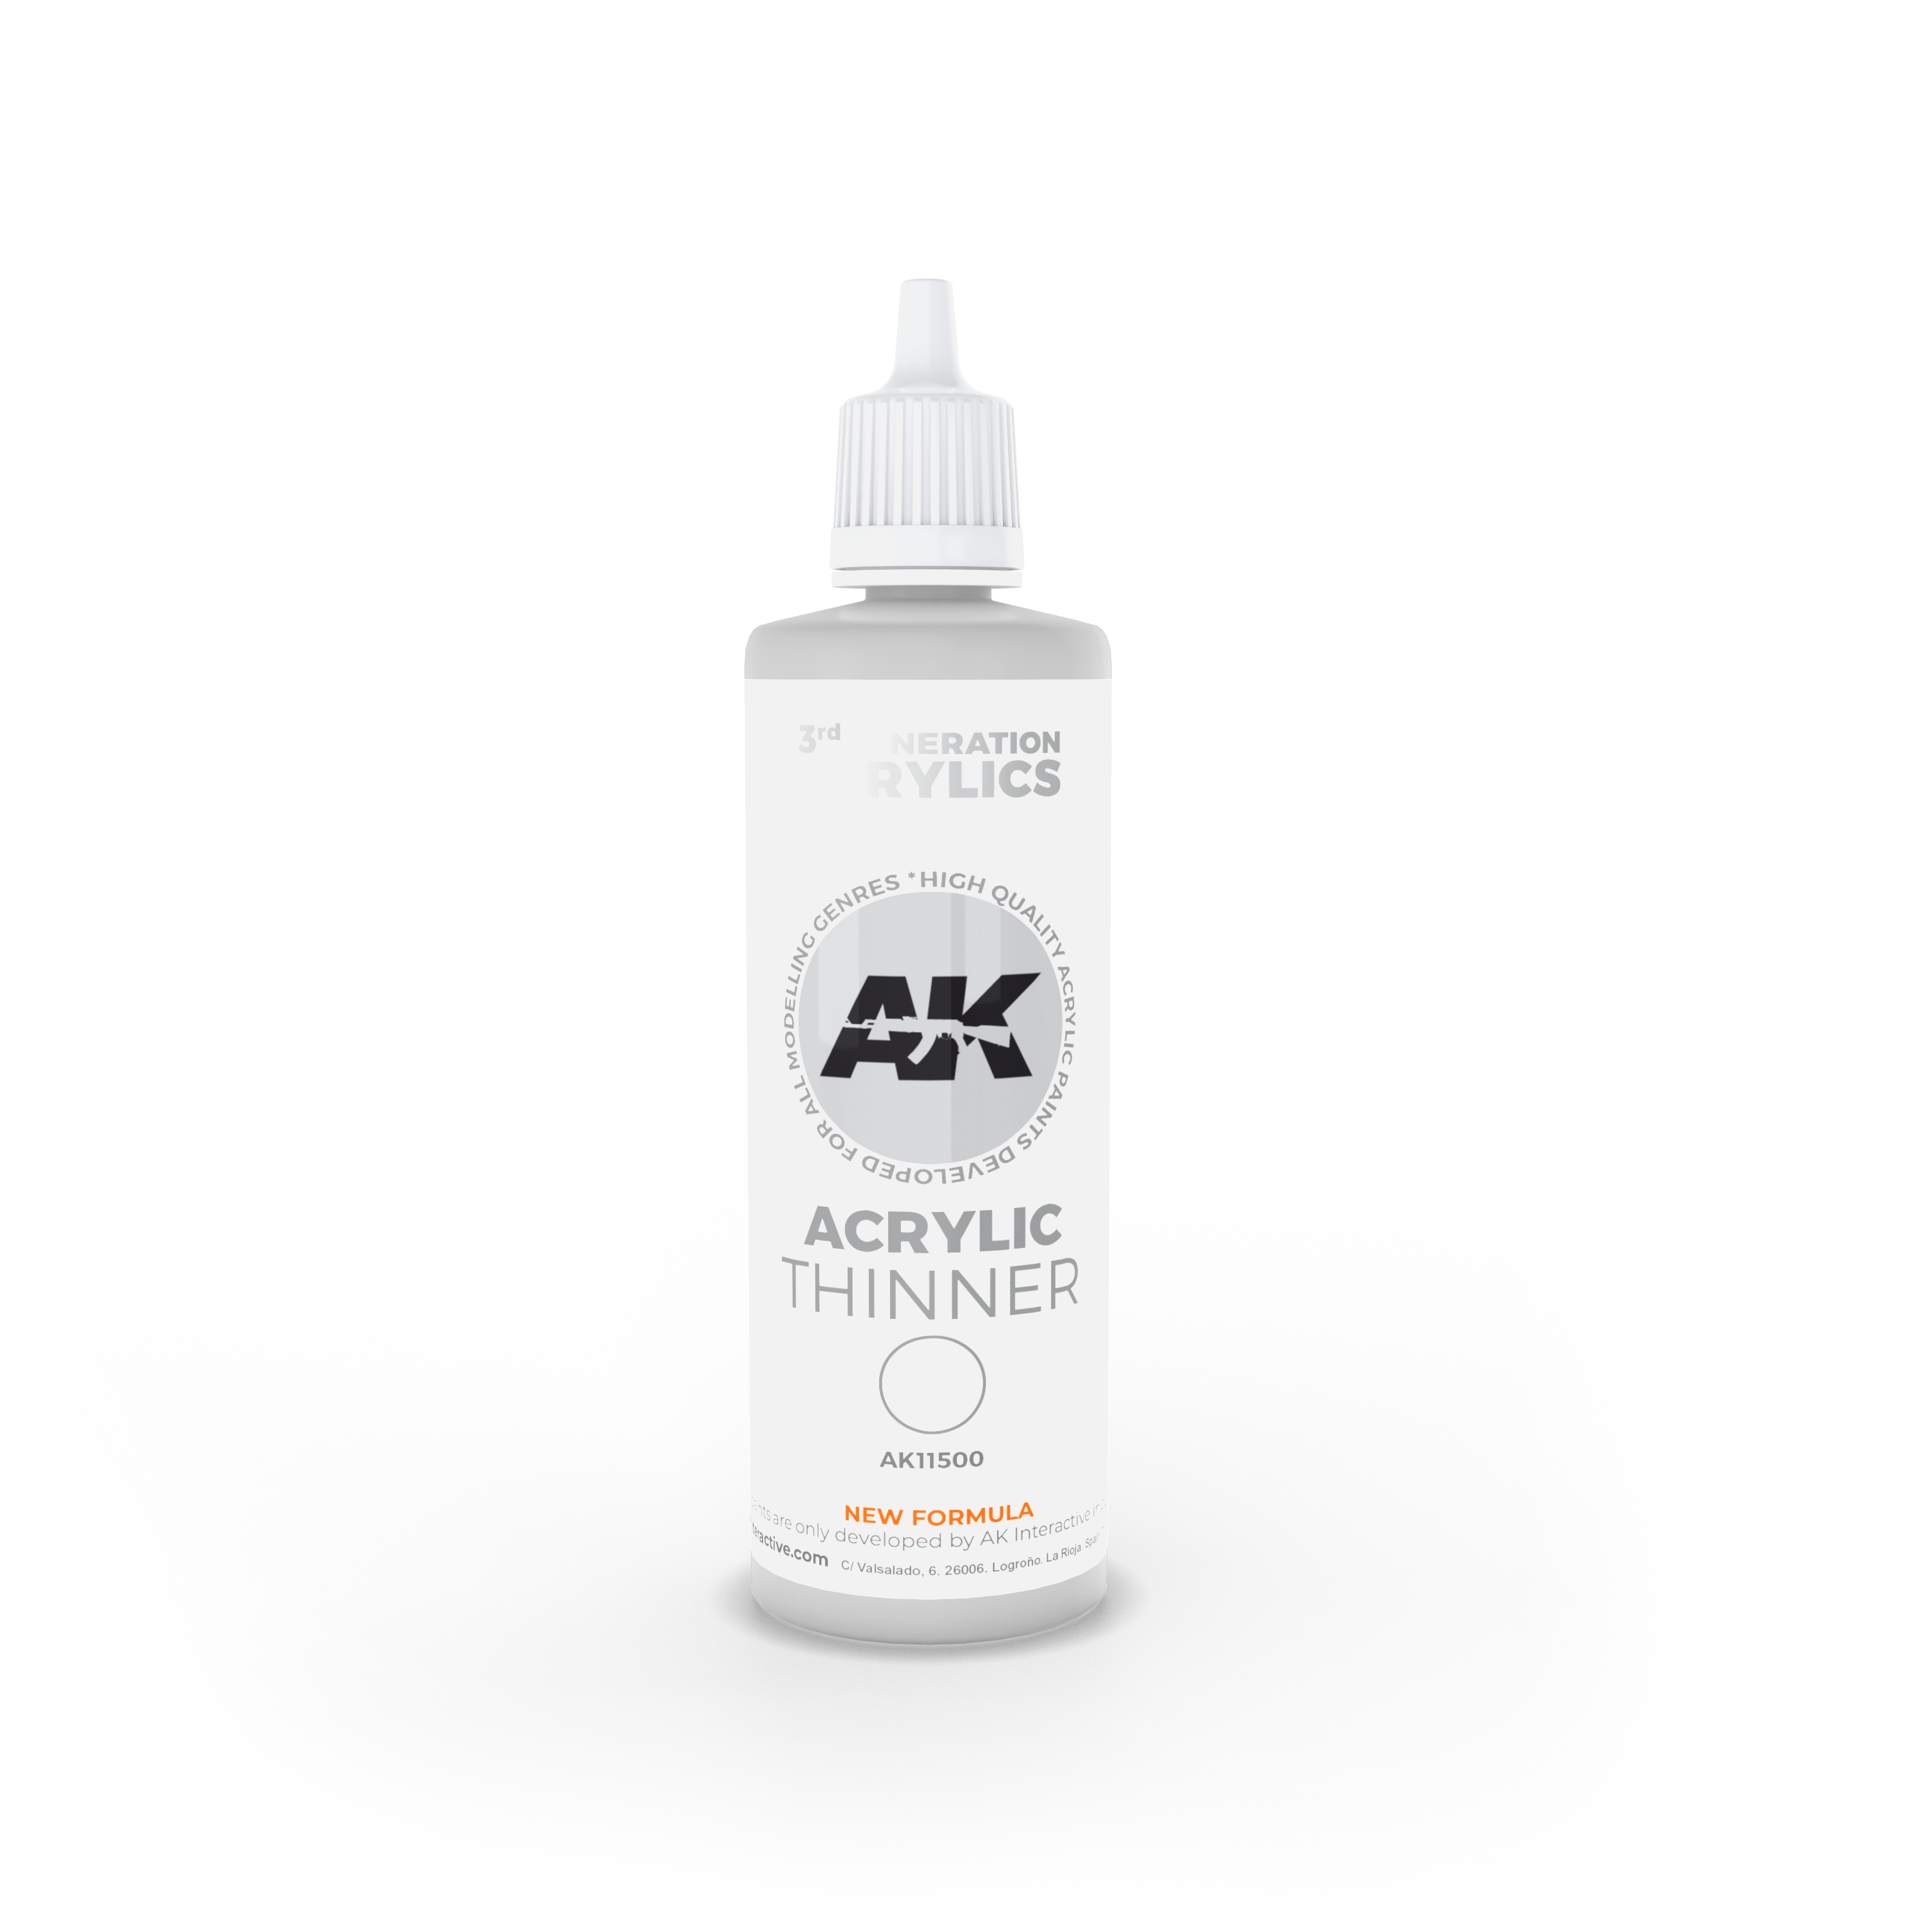 AK Interactive 3rd Generation Thinner 100ml 3rd Generation Acrylic AK INTERACTIVE    | Red Claw Gaming